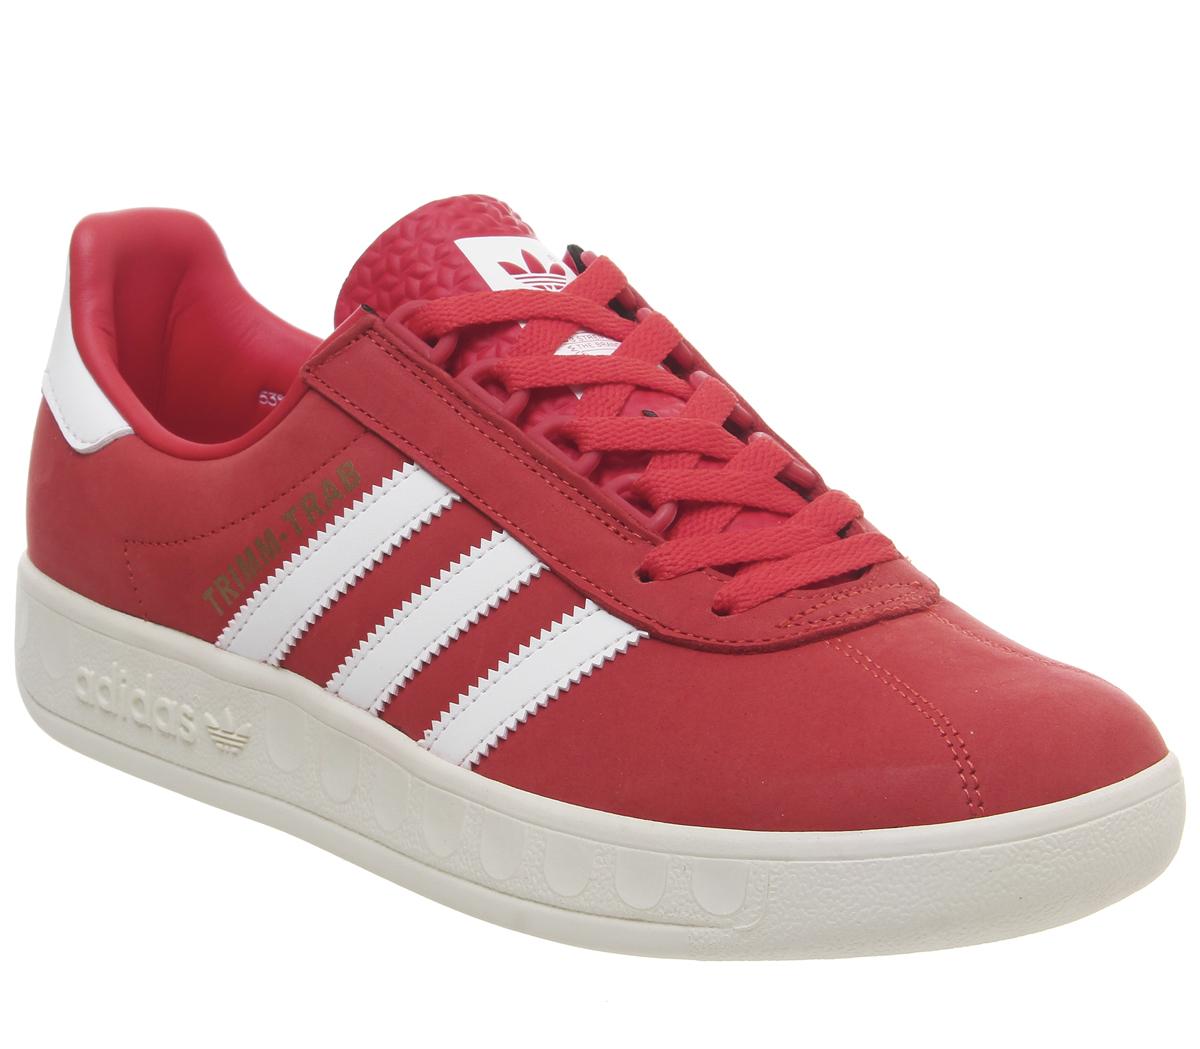 lade som om Michelangelo Skære af adidas Trimm Trab Trainers Active Red White Gold - Men's Trainers